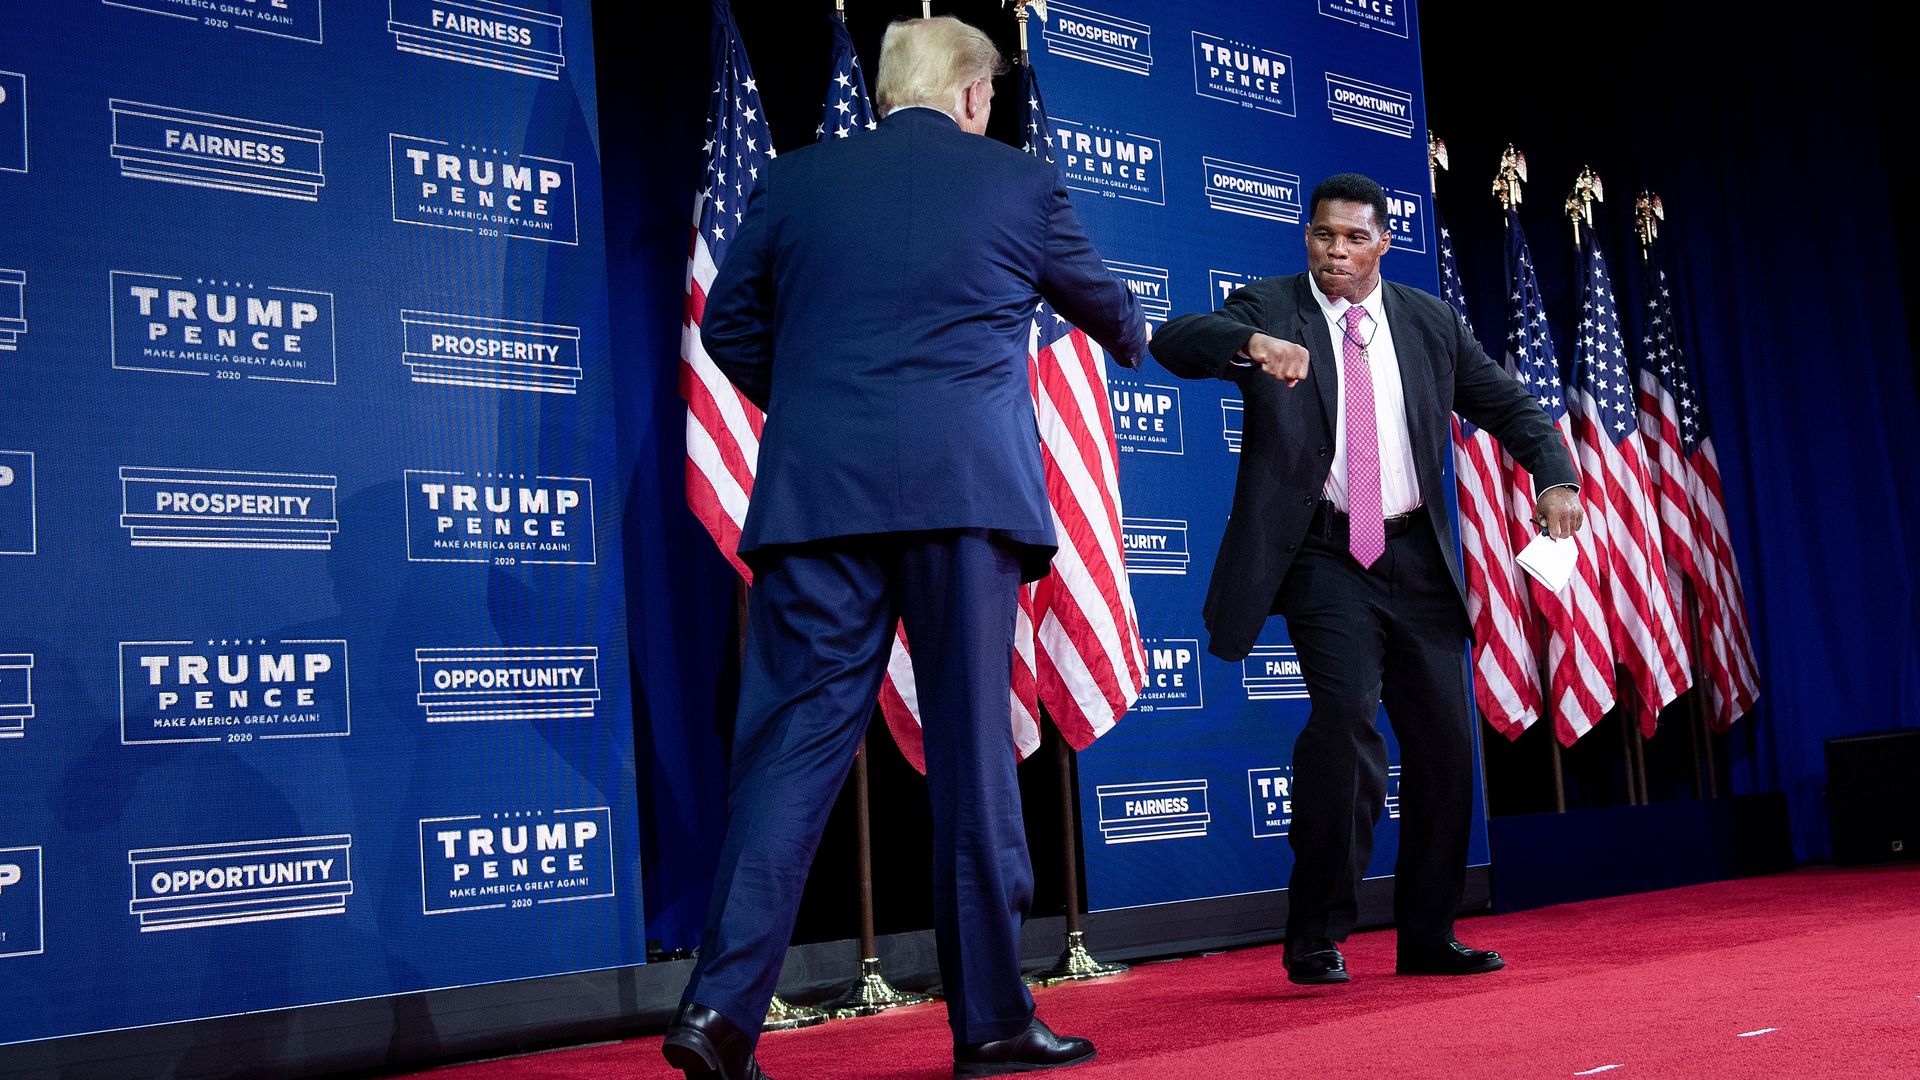 Donald Trump elbow bumps Herschel Walker on a red carpet in front of a wall displaying TRUMP/PENCE signs and a row of American flags.